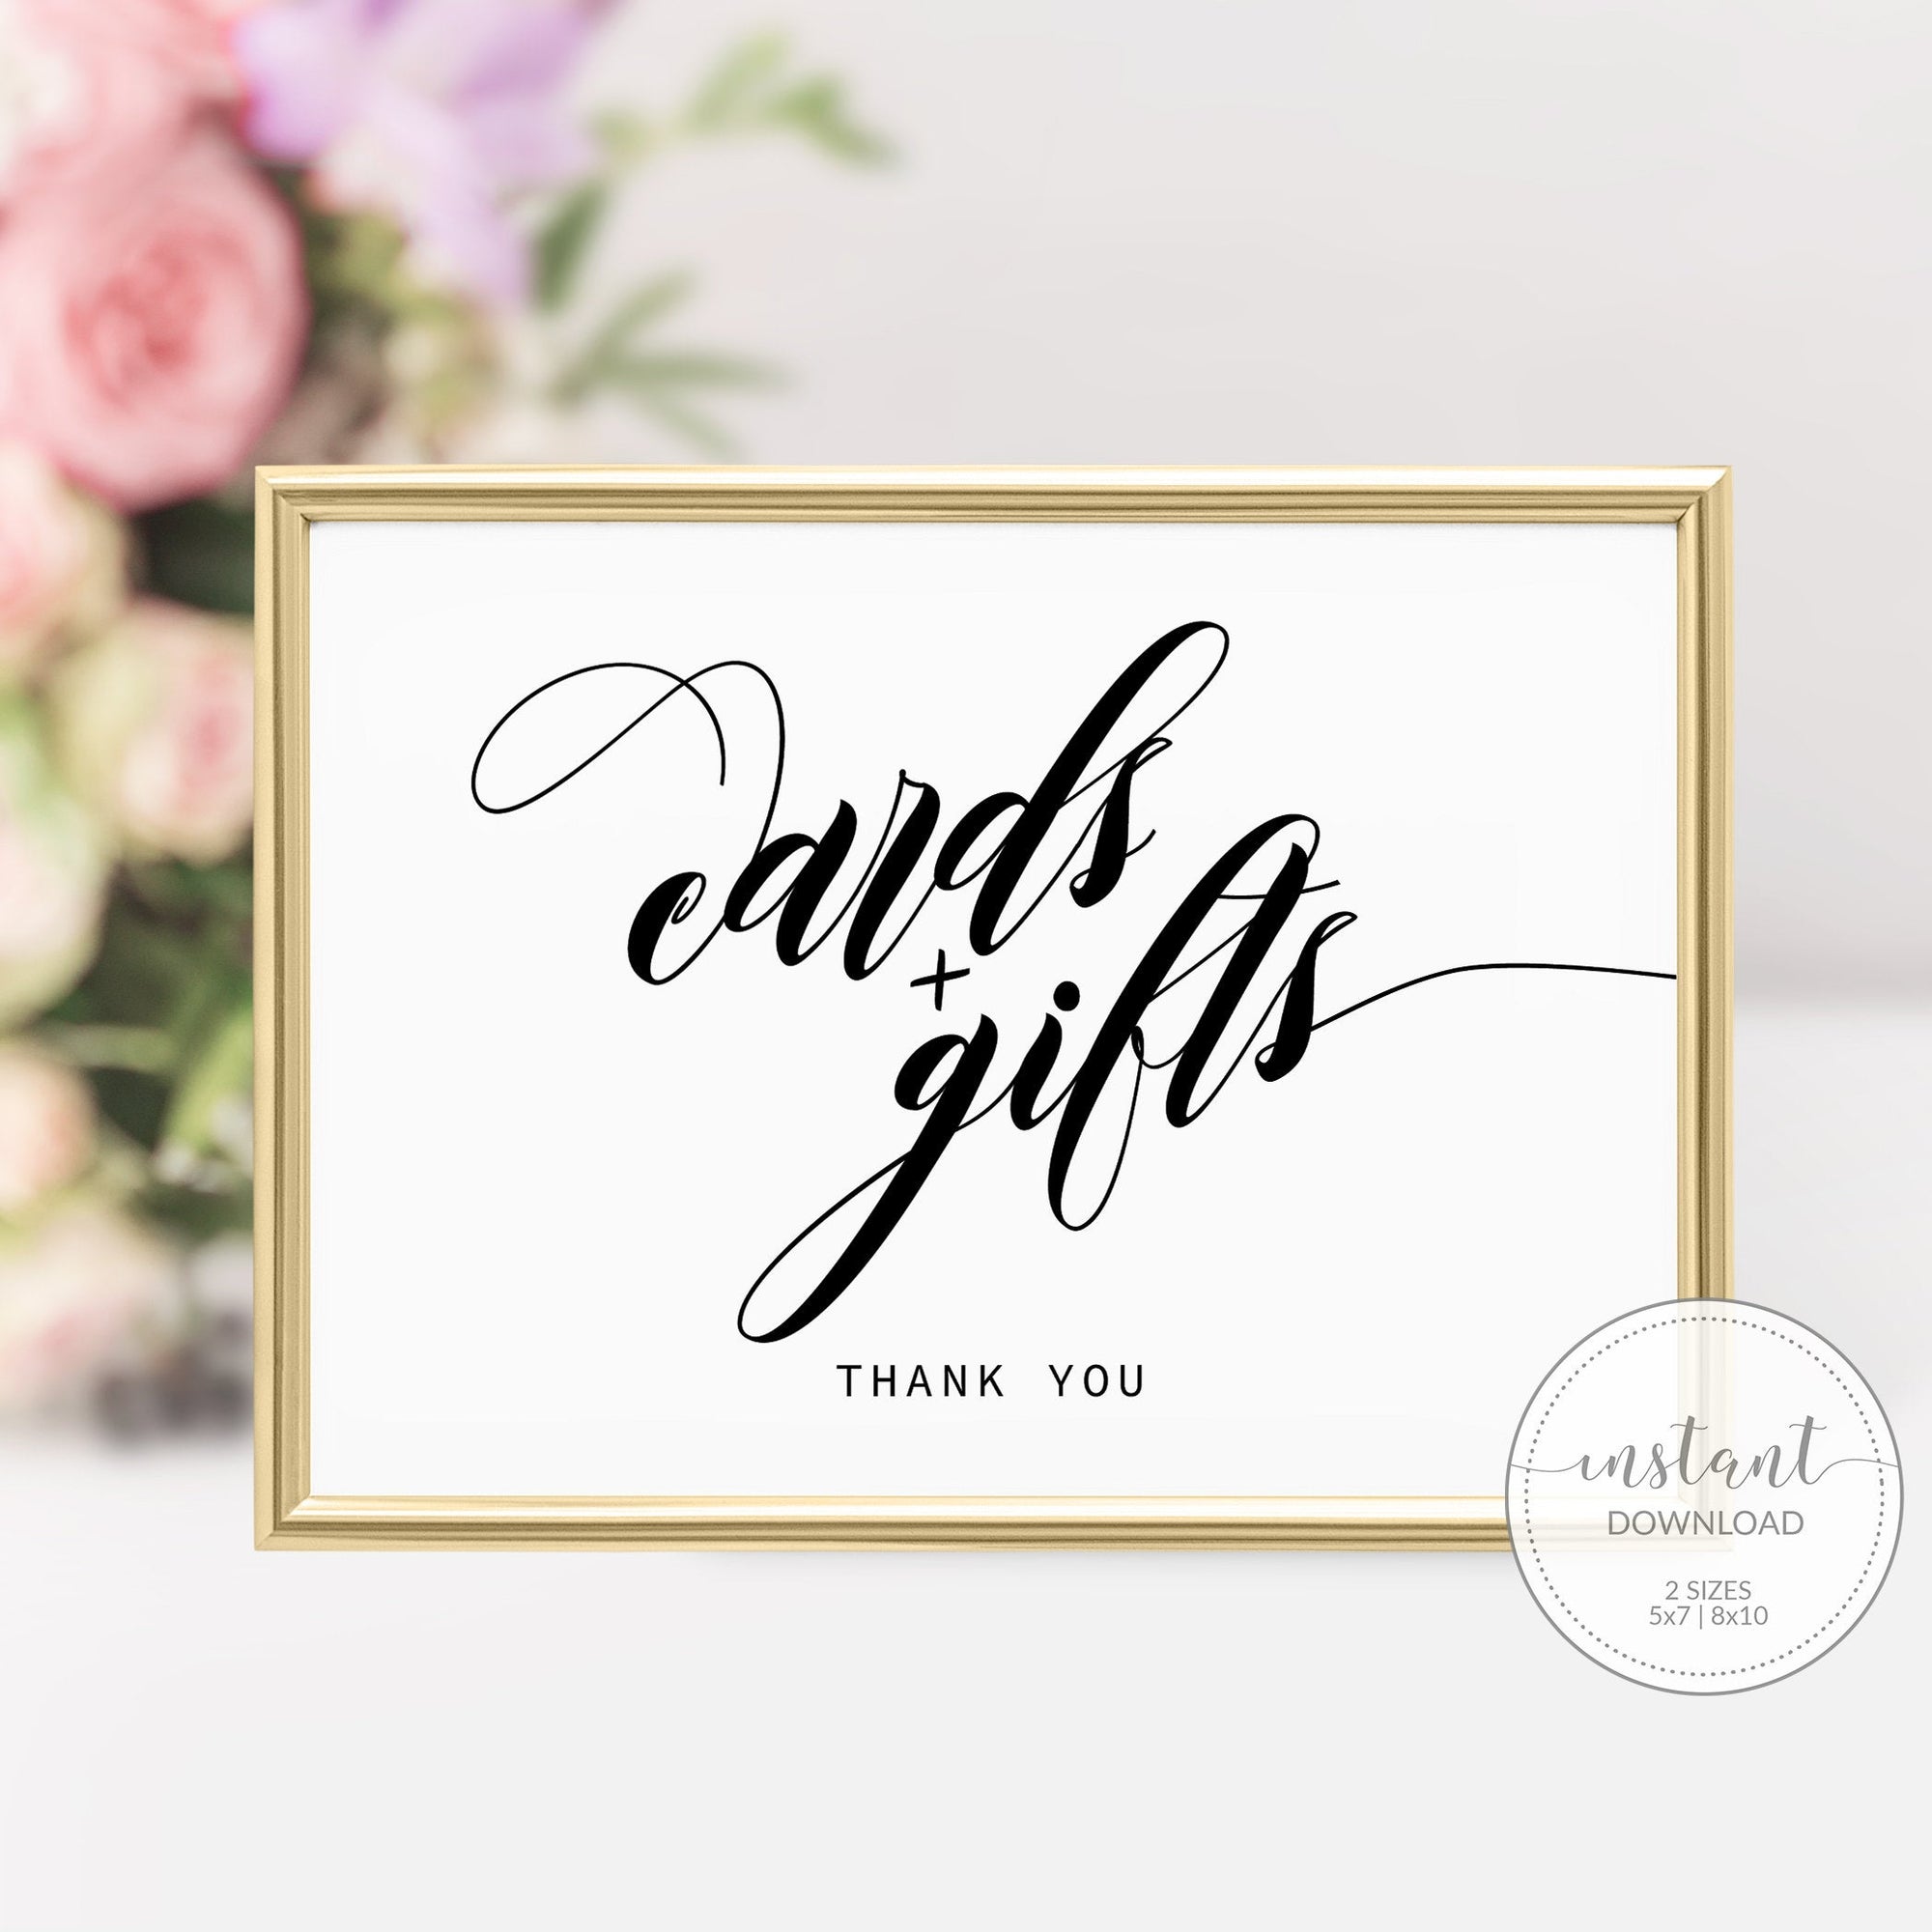 Cards and Gifts Sign, INSTANT DOWNLOAD, Wedding Sign Cards and Gifts, Bridal Shower Decor, Baby Shower Gift Table Sign Printable - SFB100 - @PlumPolkaDot 